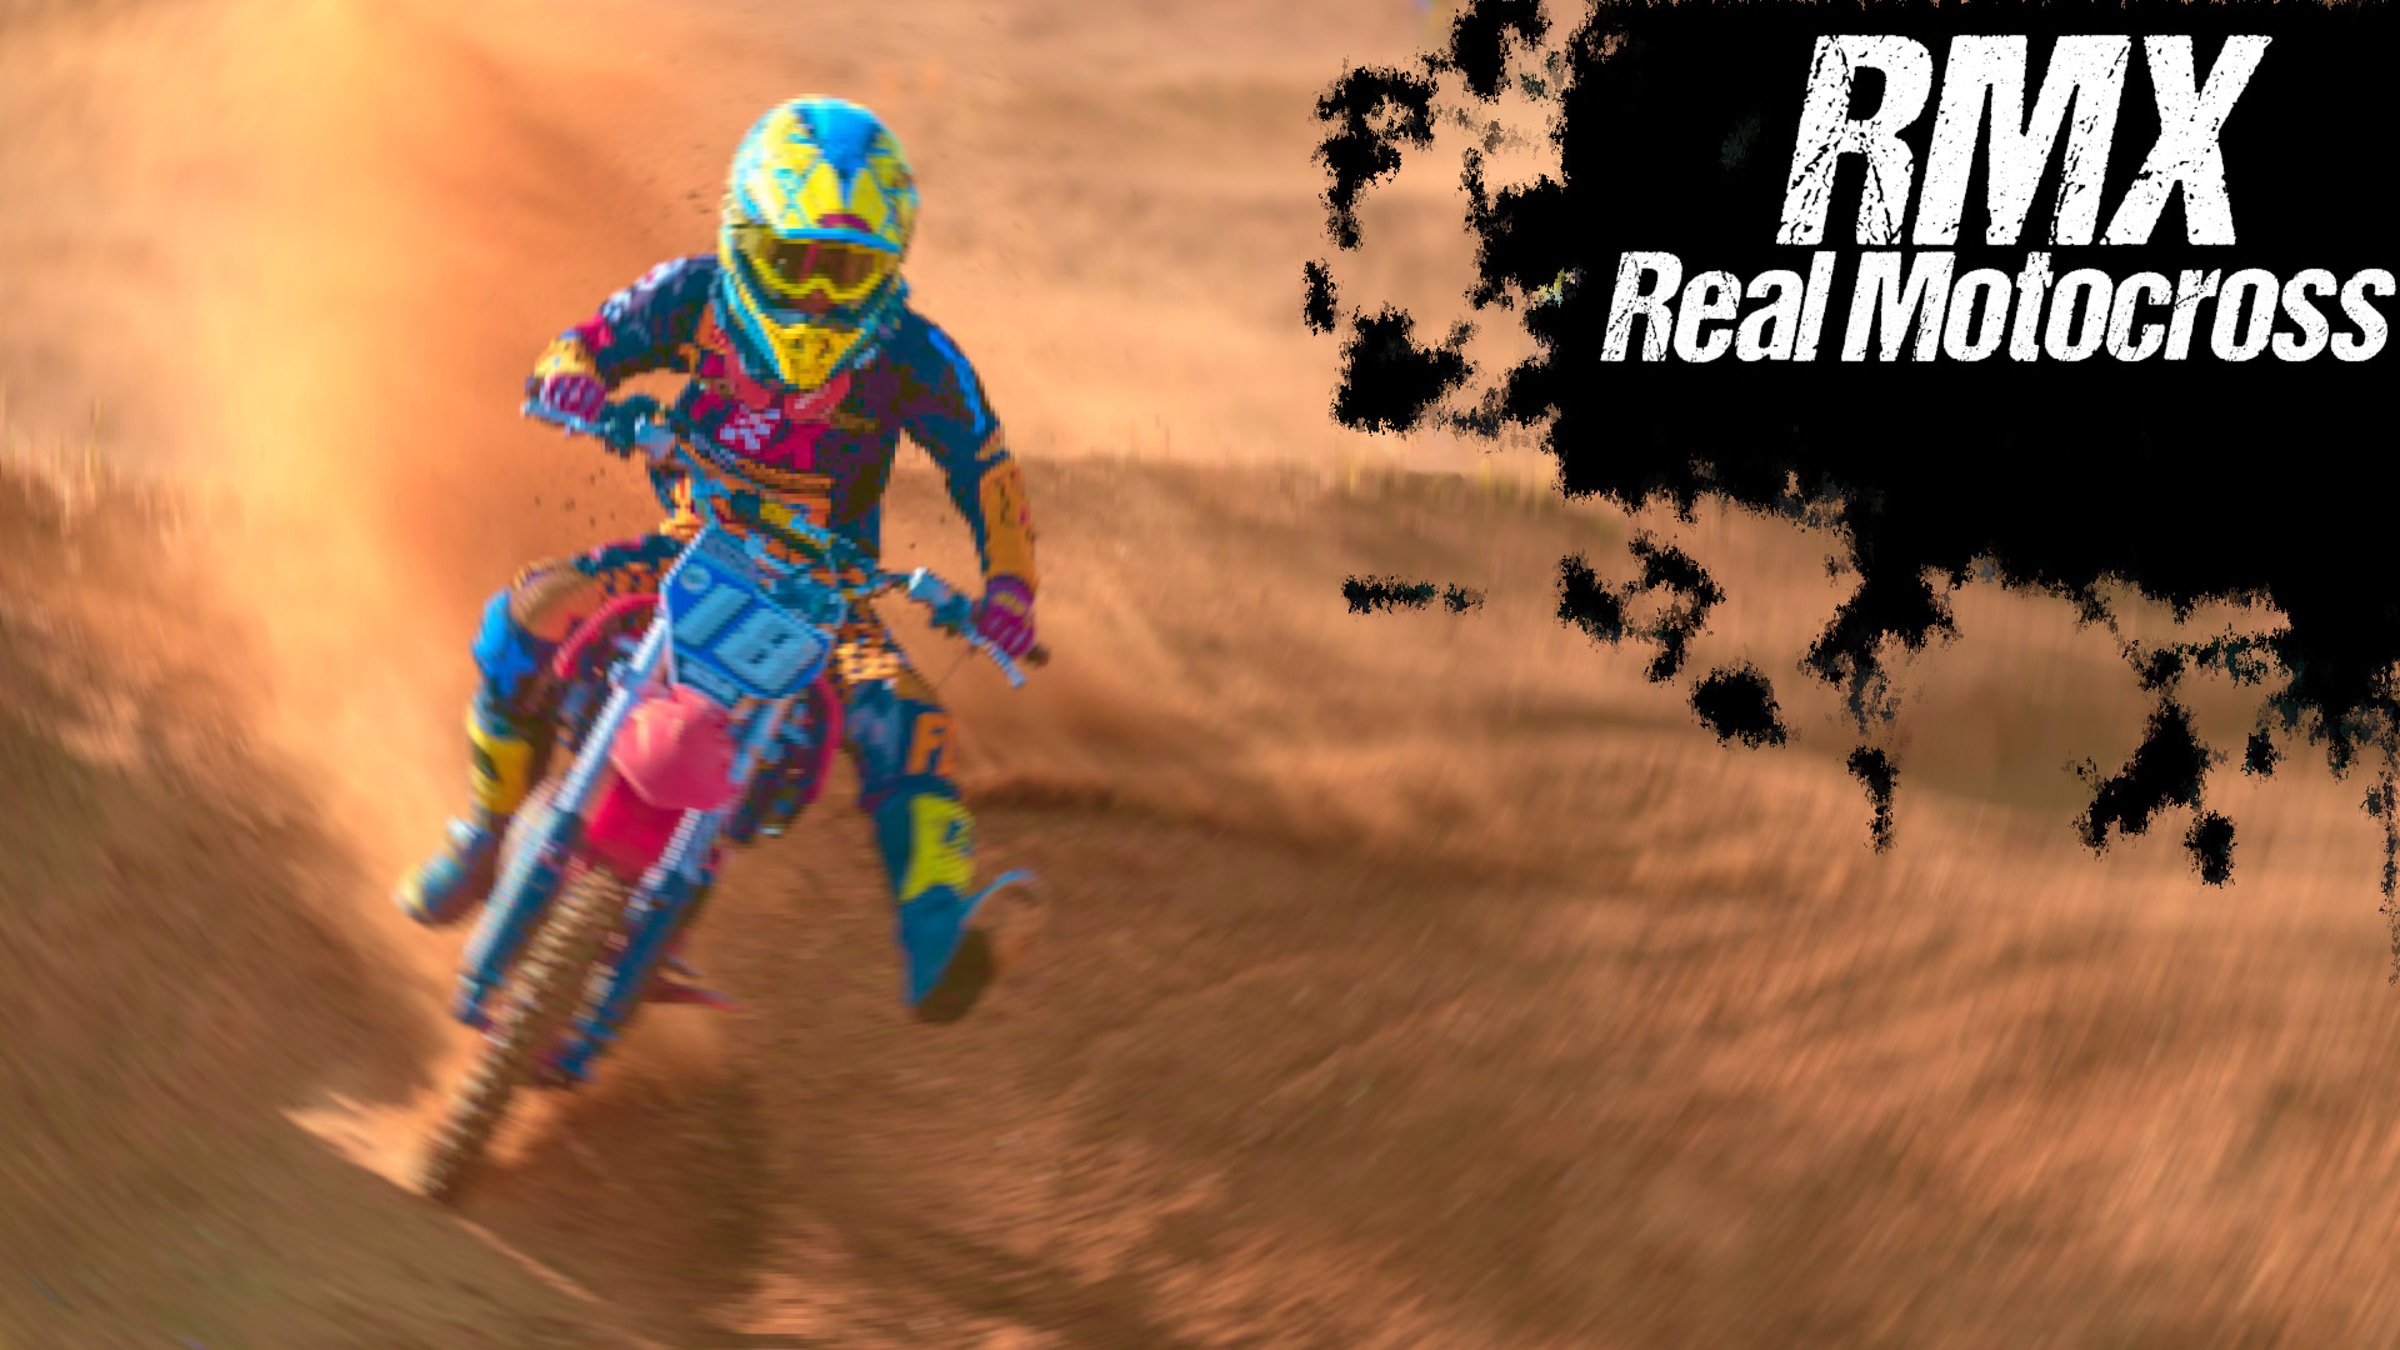 Motocross Elite - Motocross game for iPhone & Android